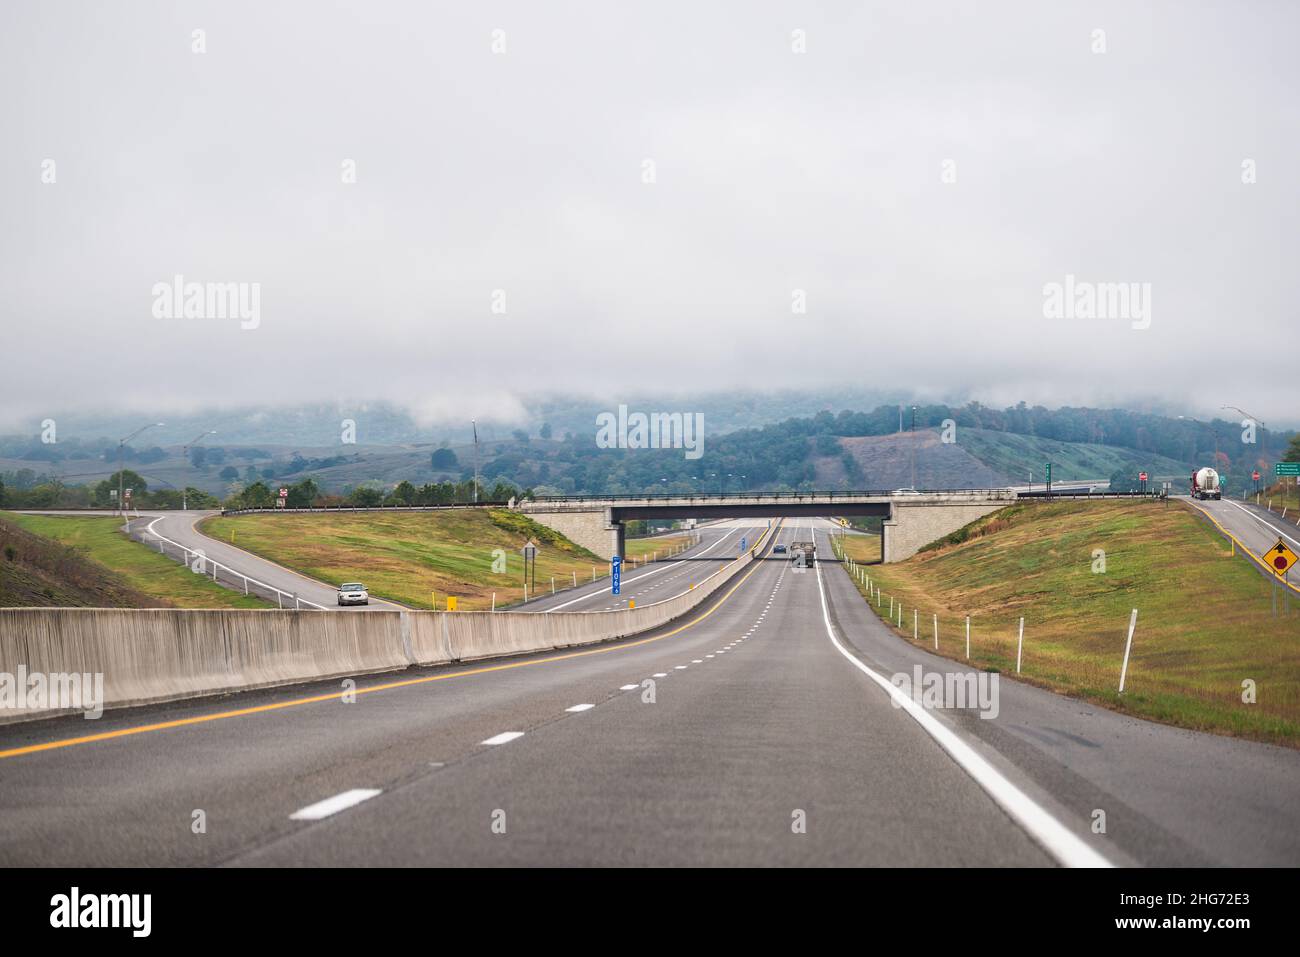 Moorefield, West Virginia Allegheny mountains driving car point of view on road to Dolly Sods with cars in traffic on highway and overcast cloudy mist Stock Photo